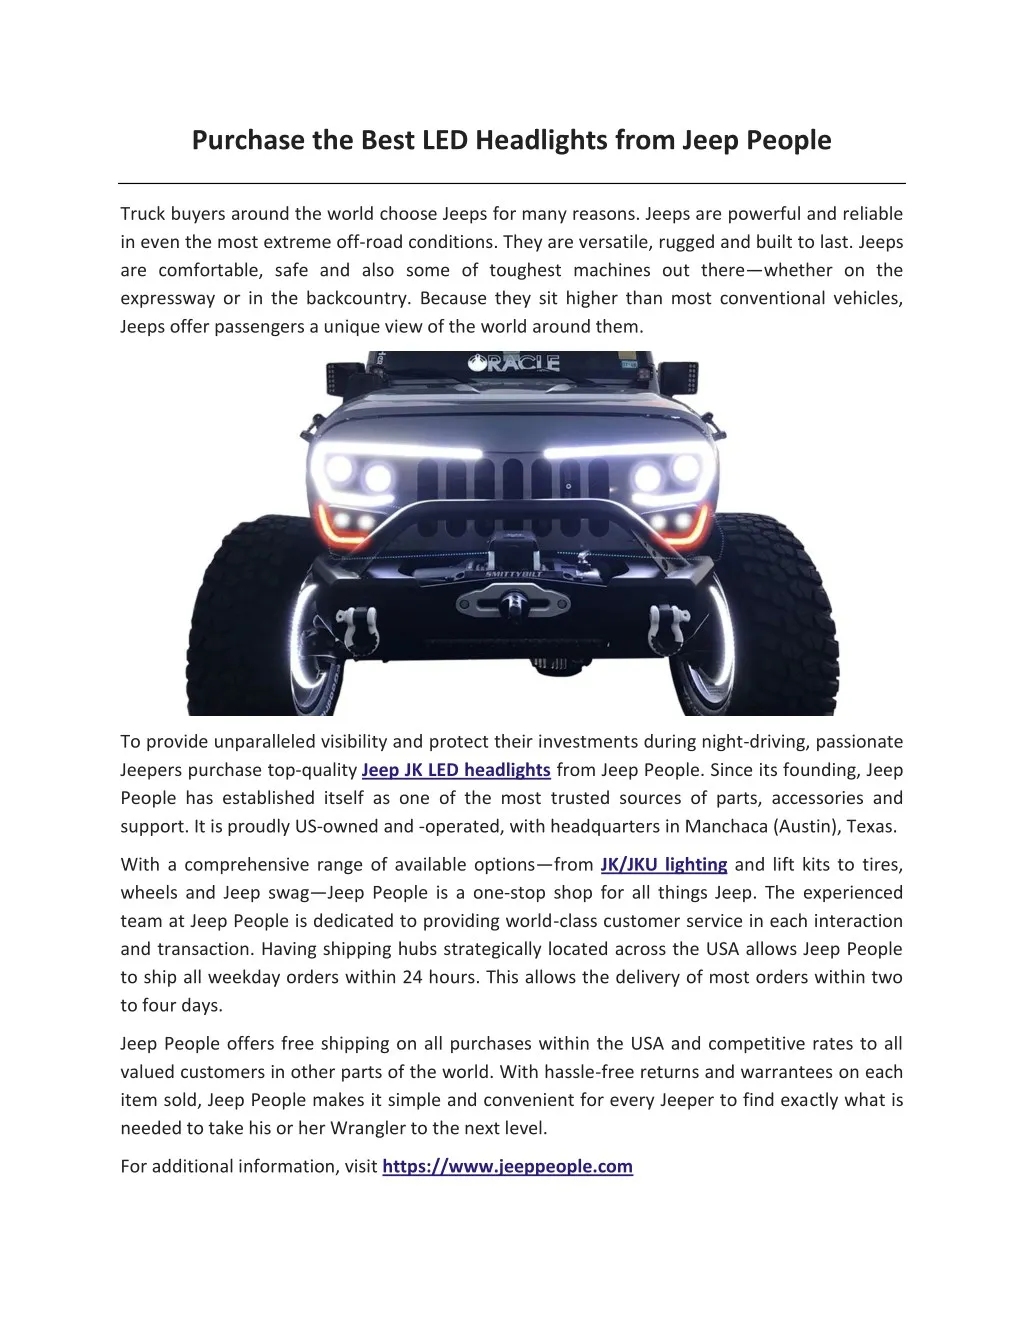 purchase the best led headlights from jeep people